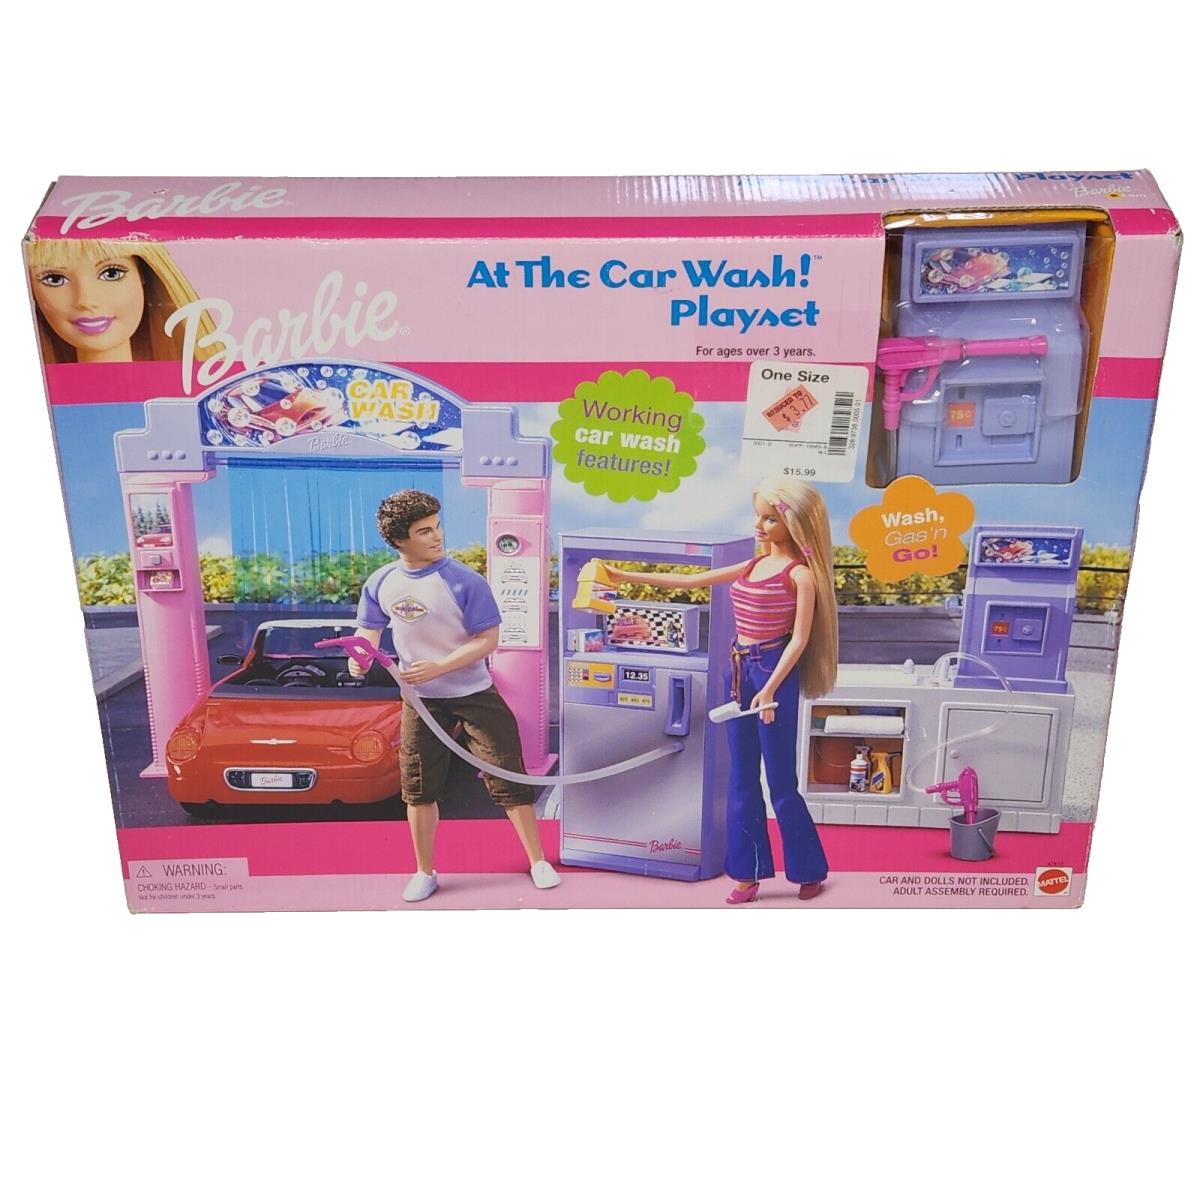 2001 Mattel Barbie AT The Car Wash Playset Complete 47810